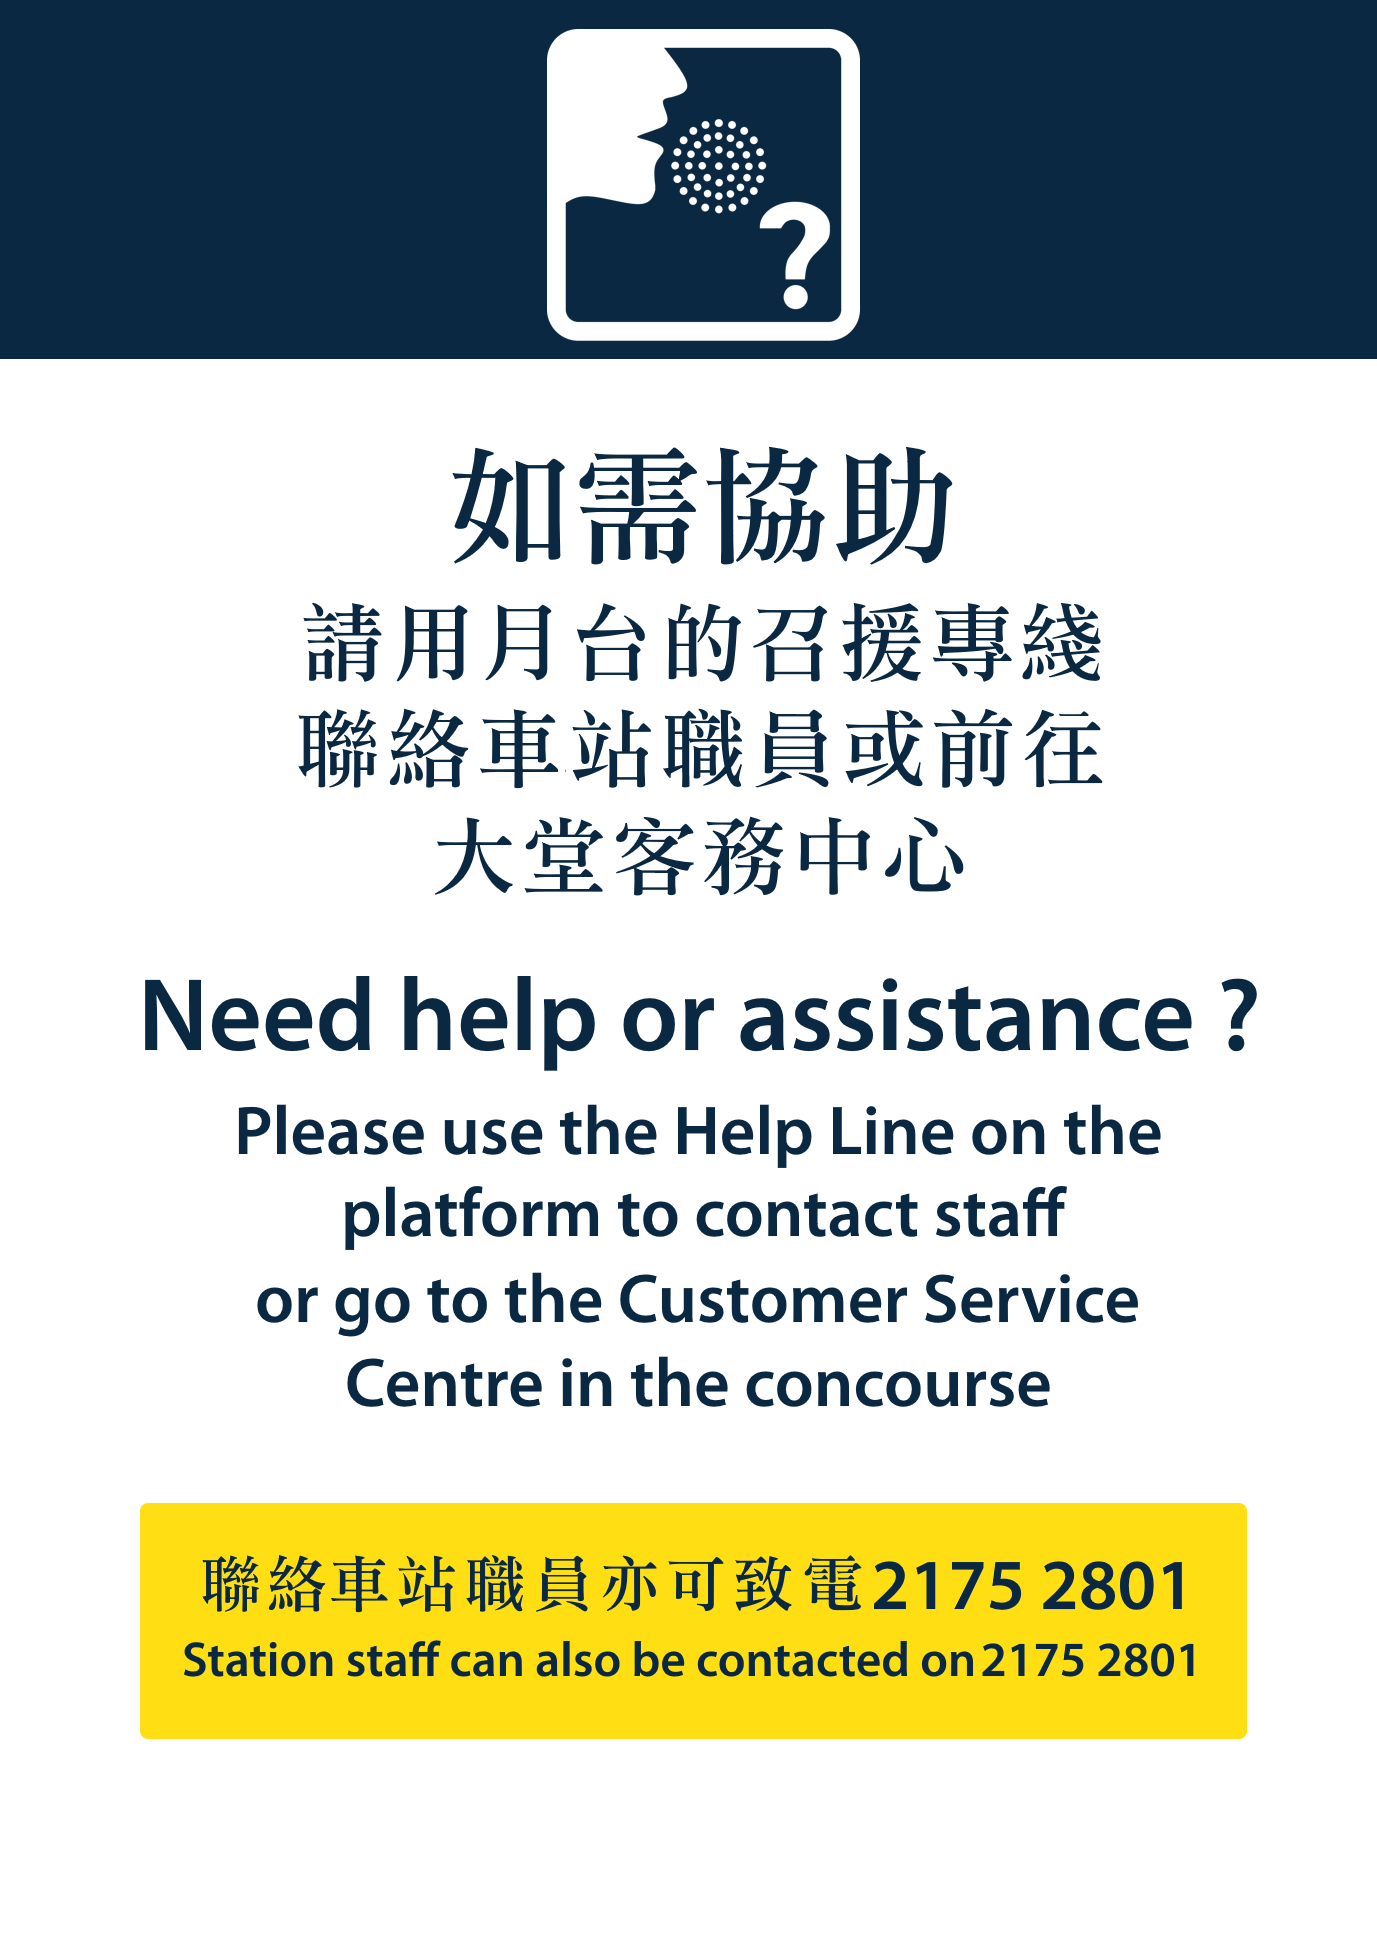 Please use the Help Line on the platform to contact staff or go to the Customer Service Centre in the concourse.